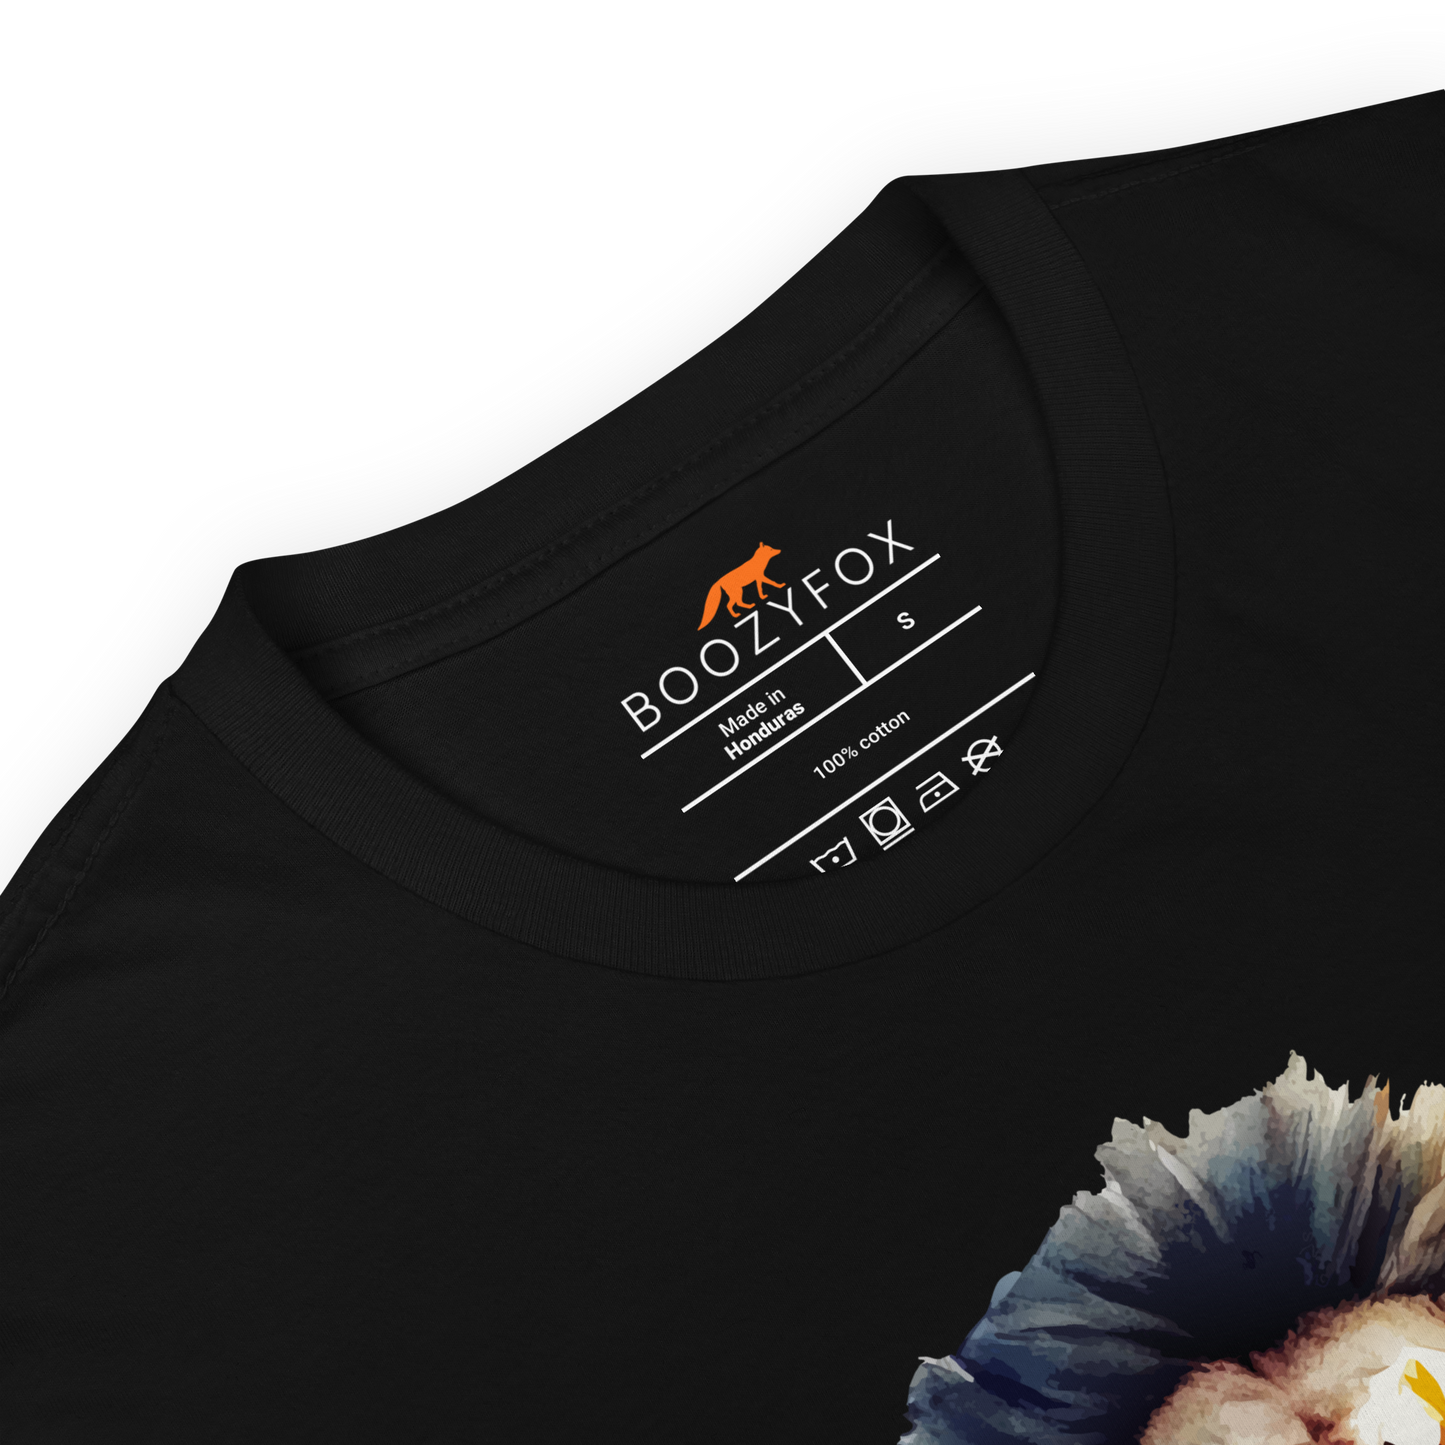 Product details of a Black Lion T-Shirt featuring a Roar-Some graphic on the chest - Cool Graphic Lion T-Shirts - Boozy Fox